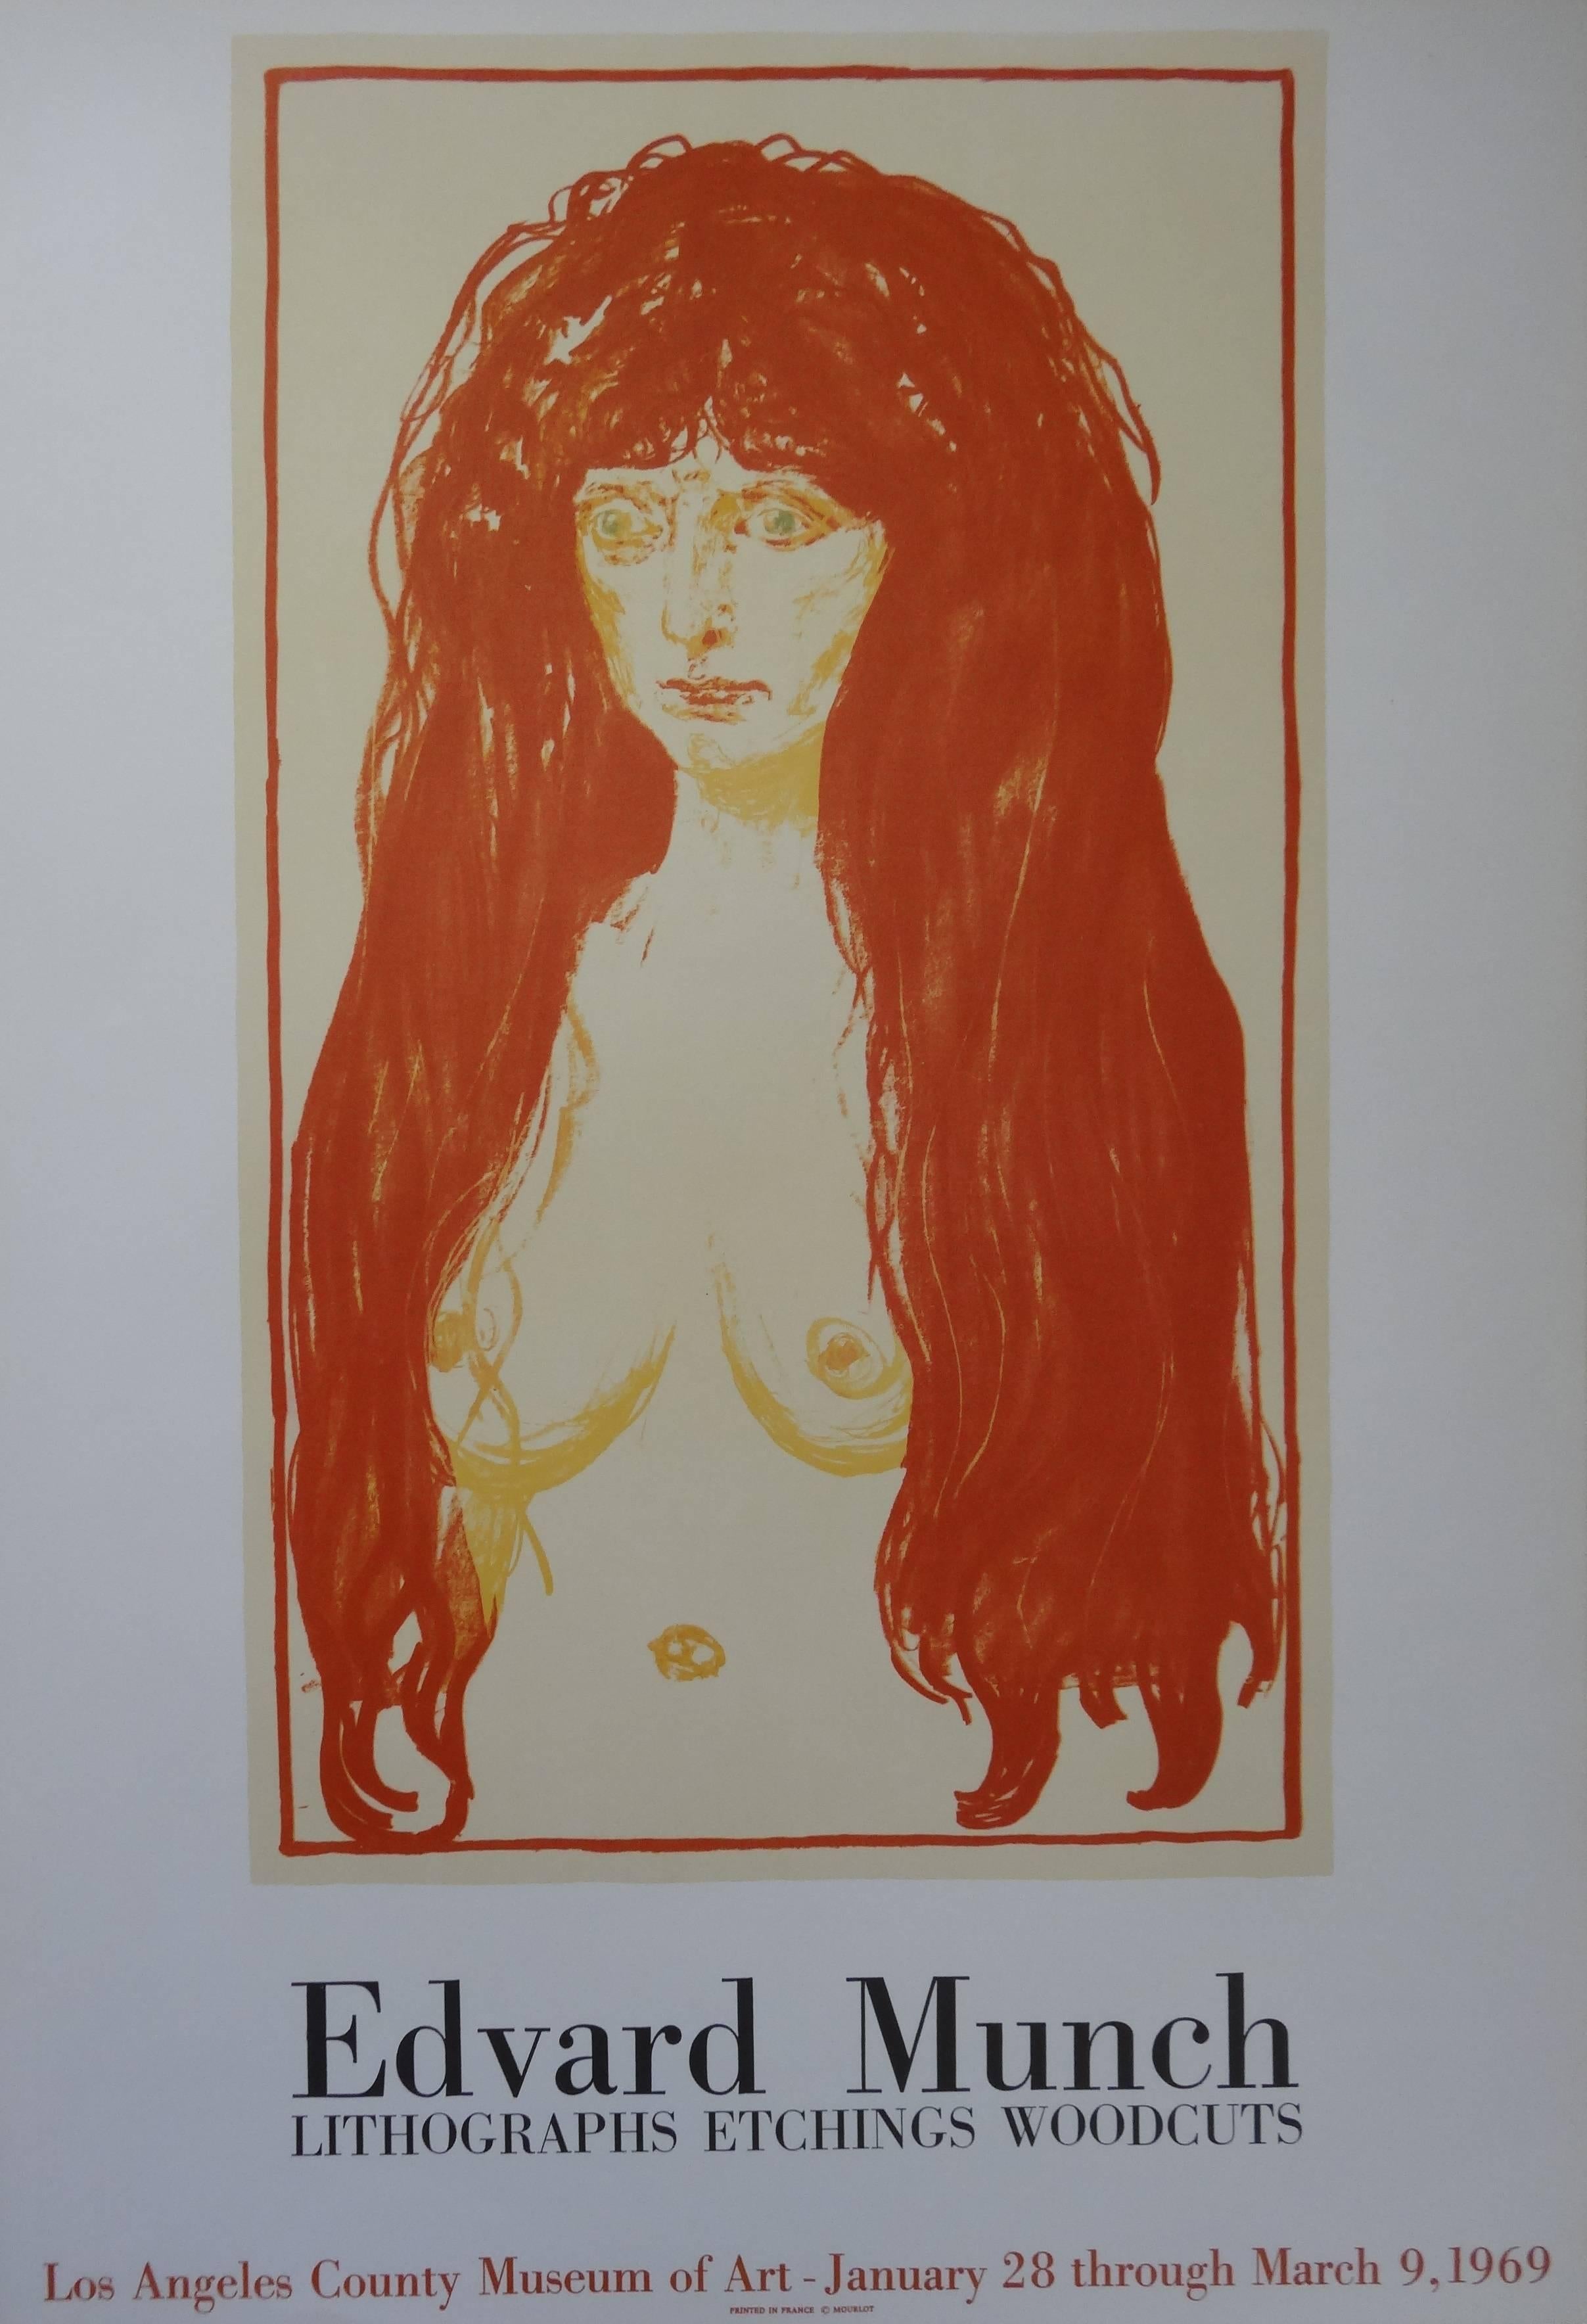 Edvard Munch Portrait Print - Redhead Woman - Lithograph Poster - Los Angeles County Museum